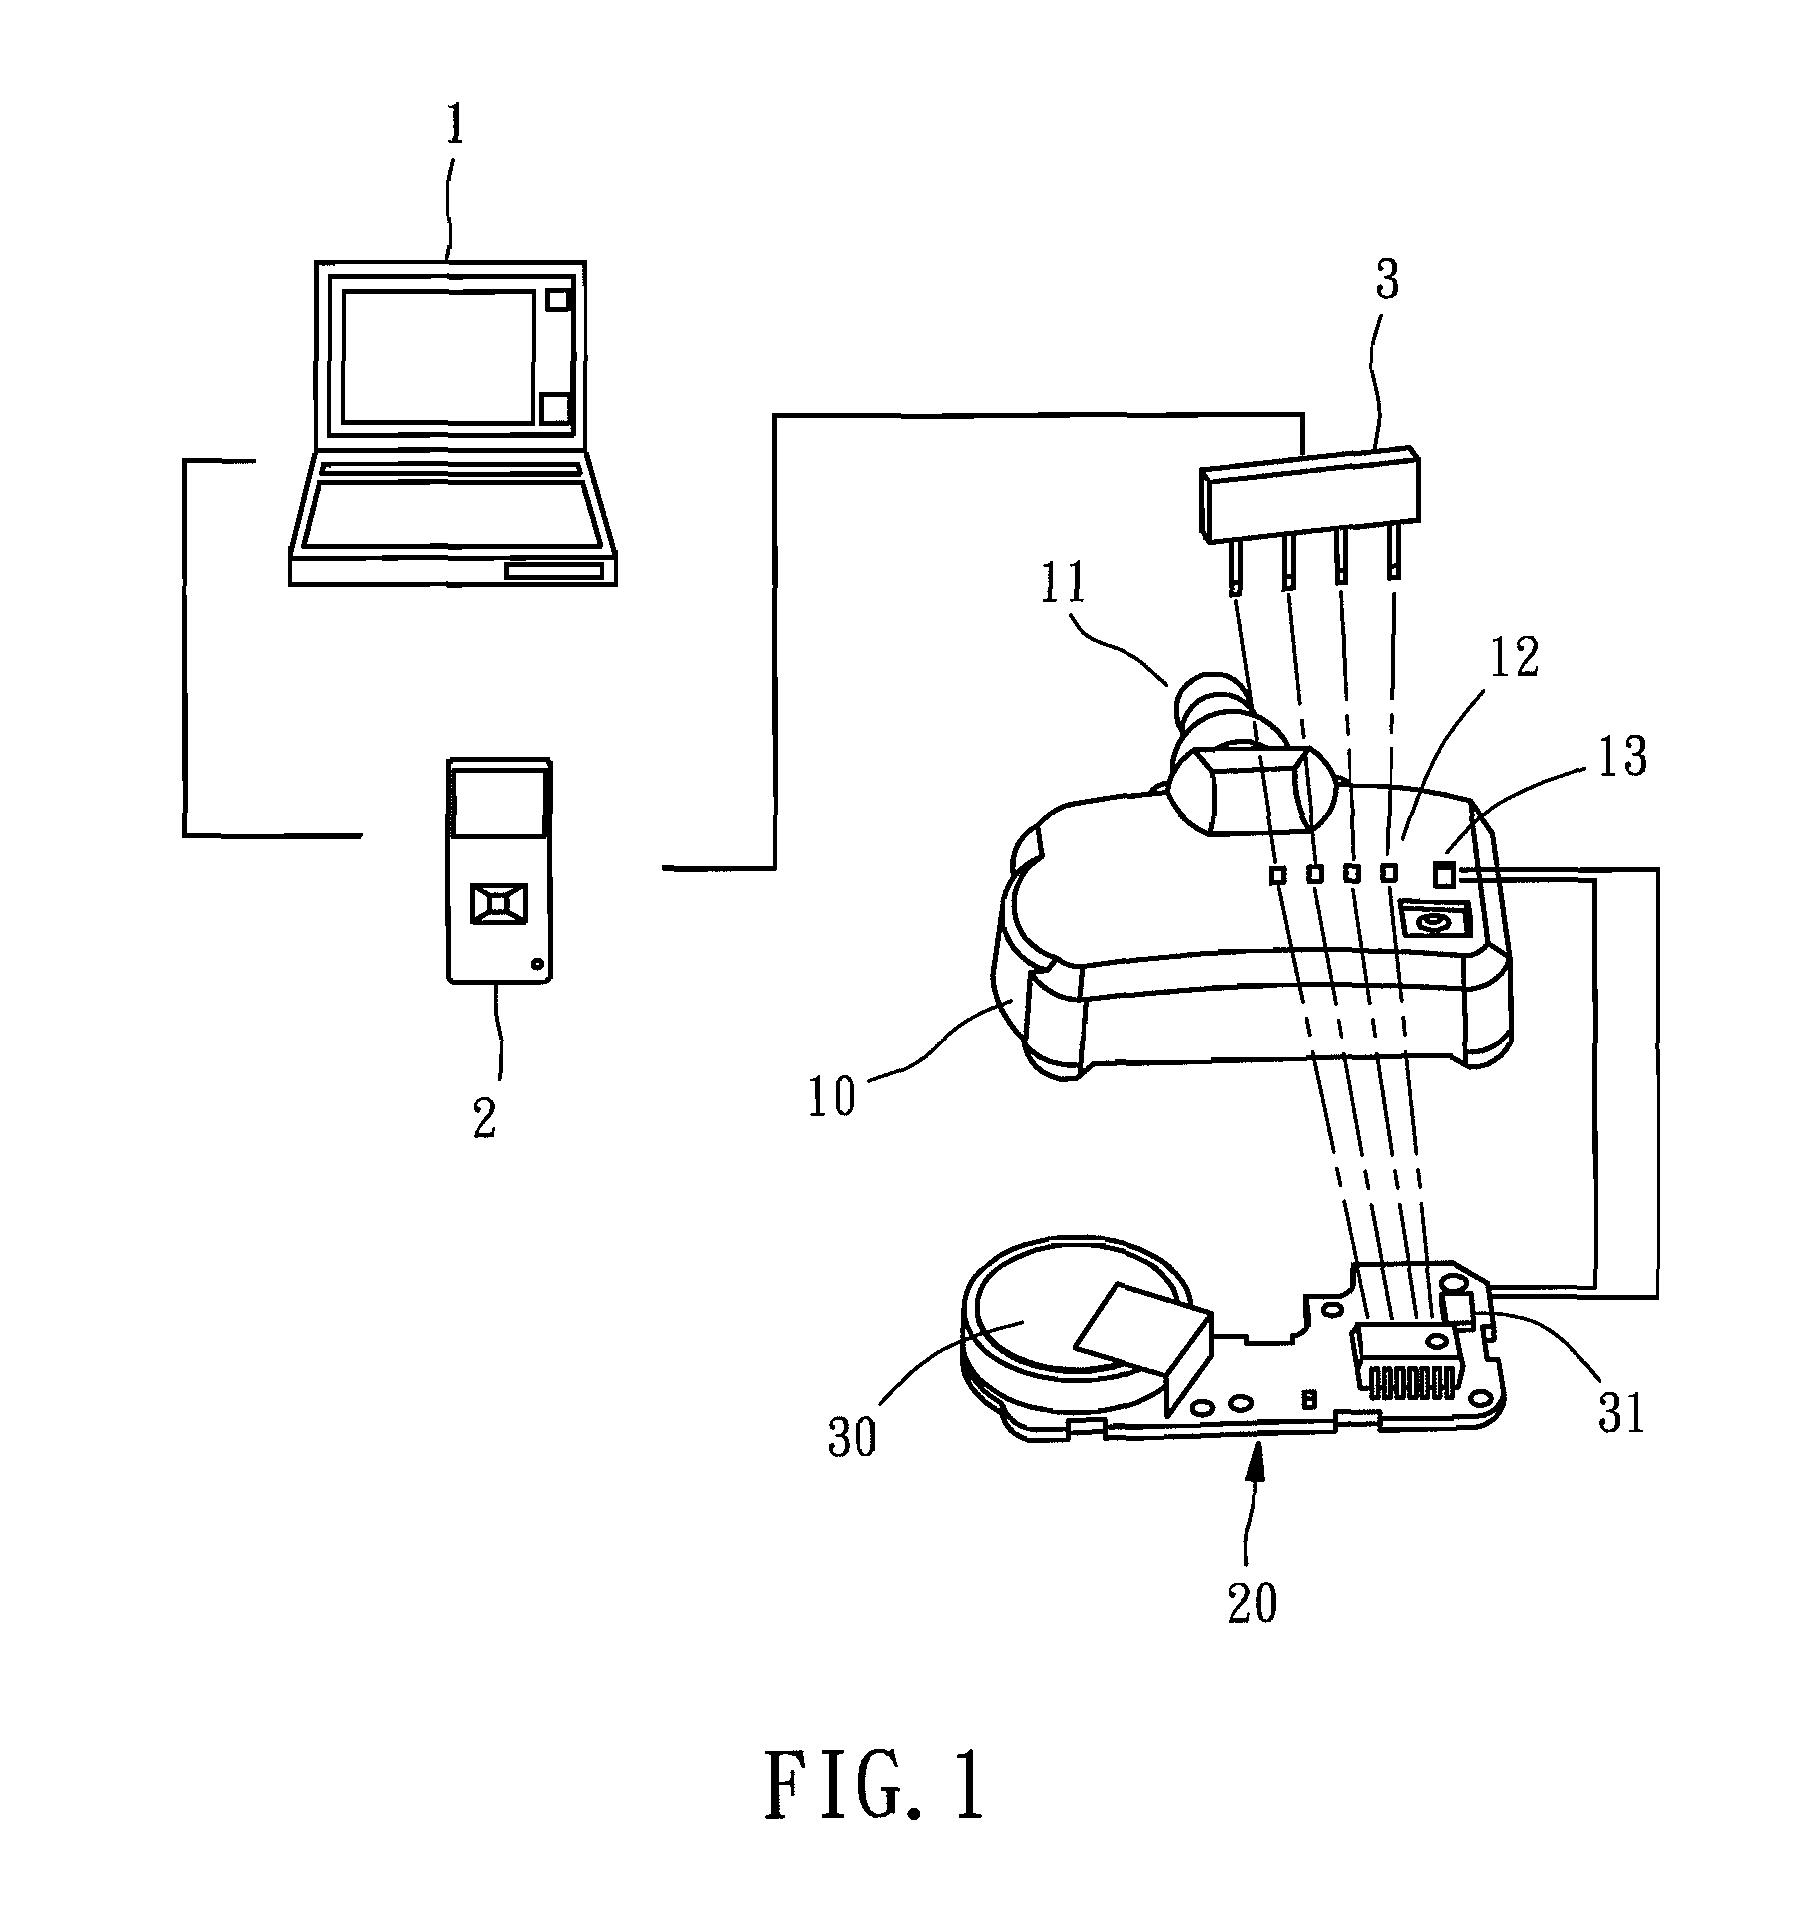 Programmable tire monitoring device and its method of use